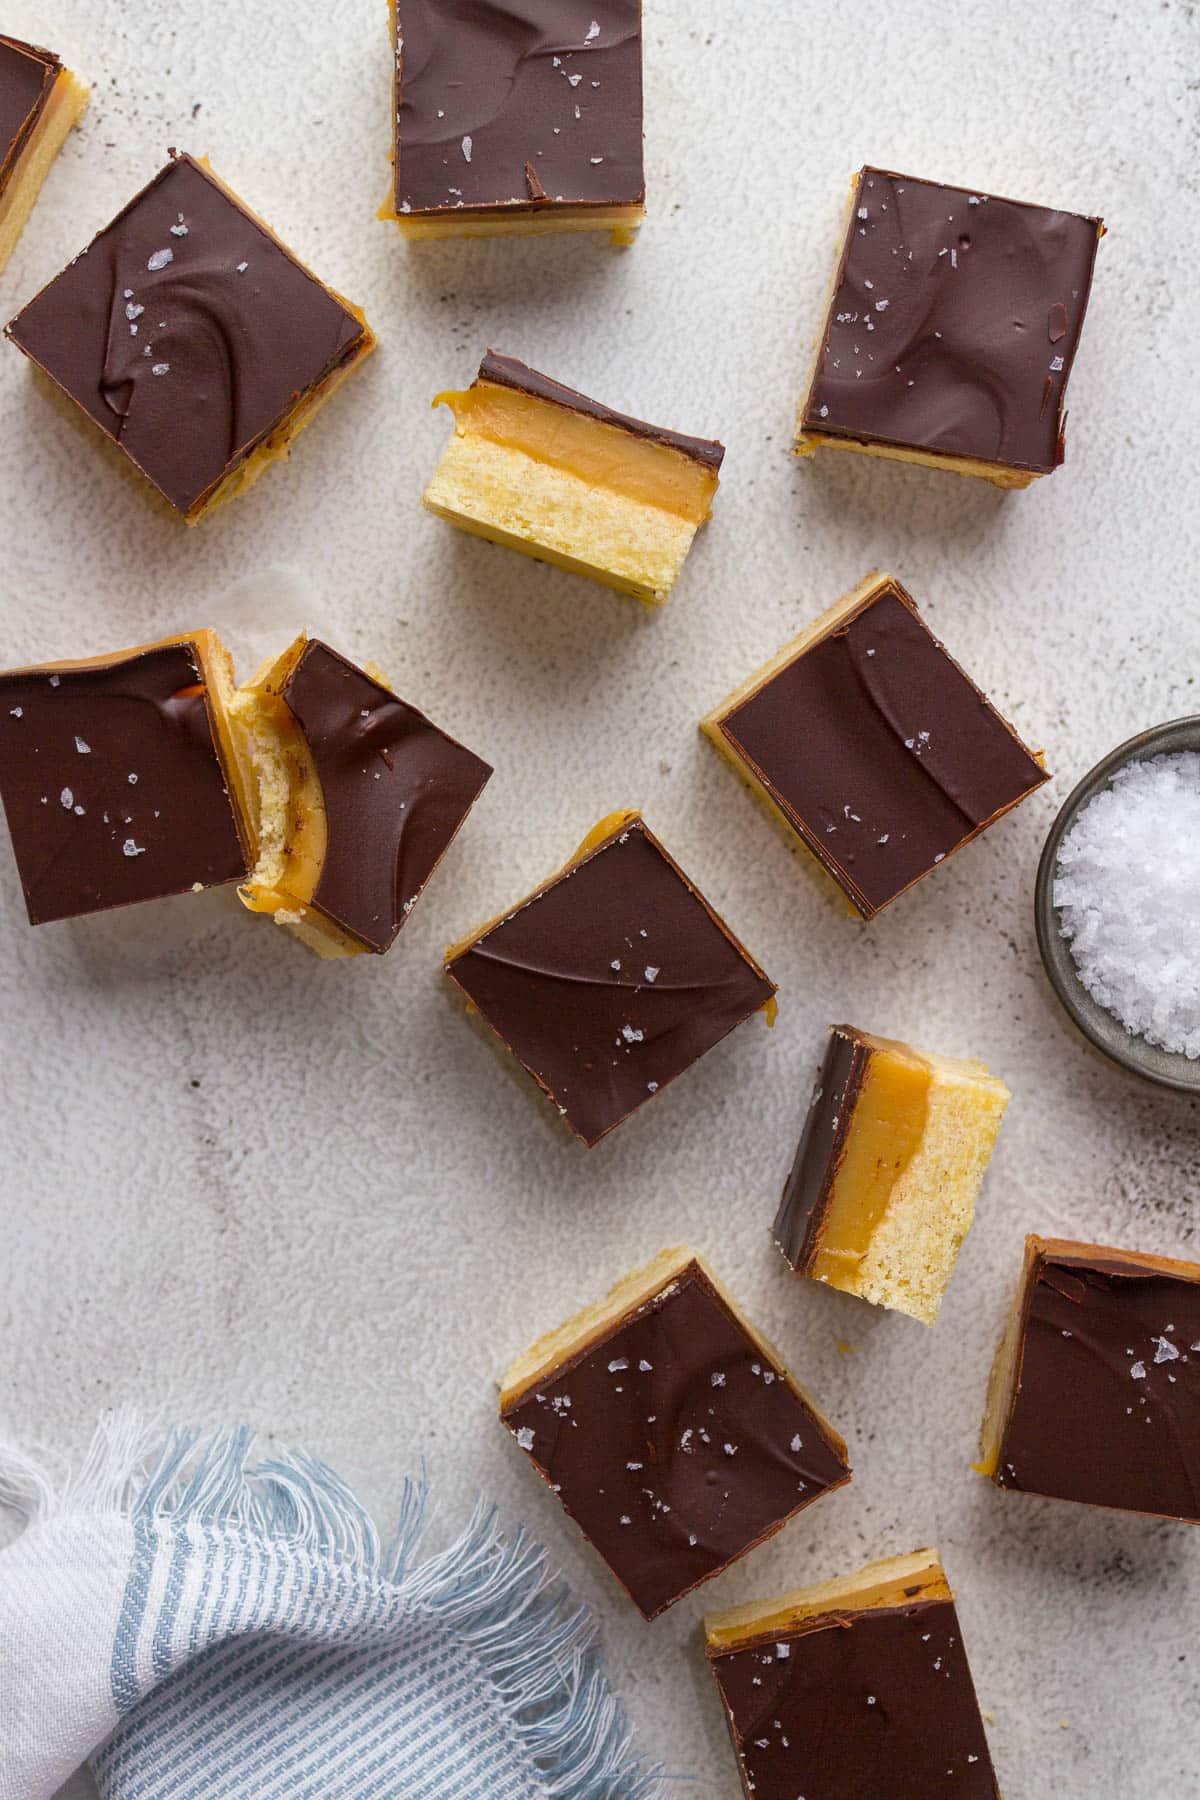 Caramel slices showing shortbread, caramel and chocolate layers.